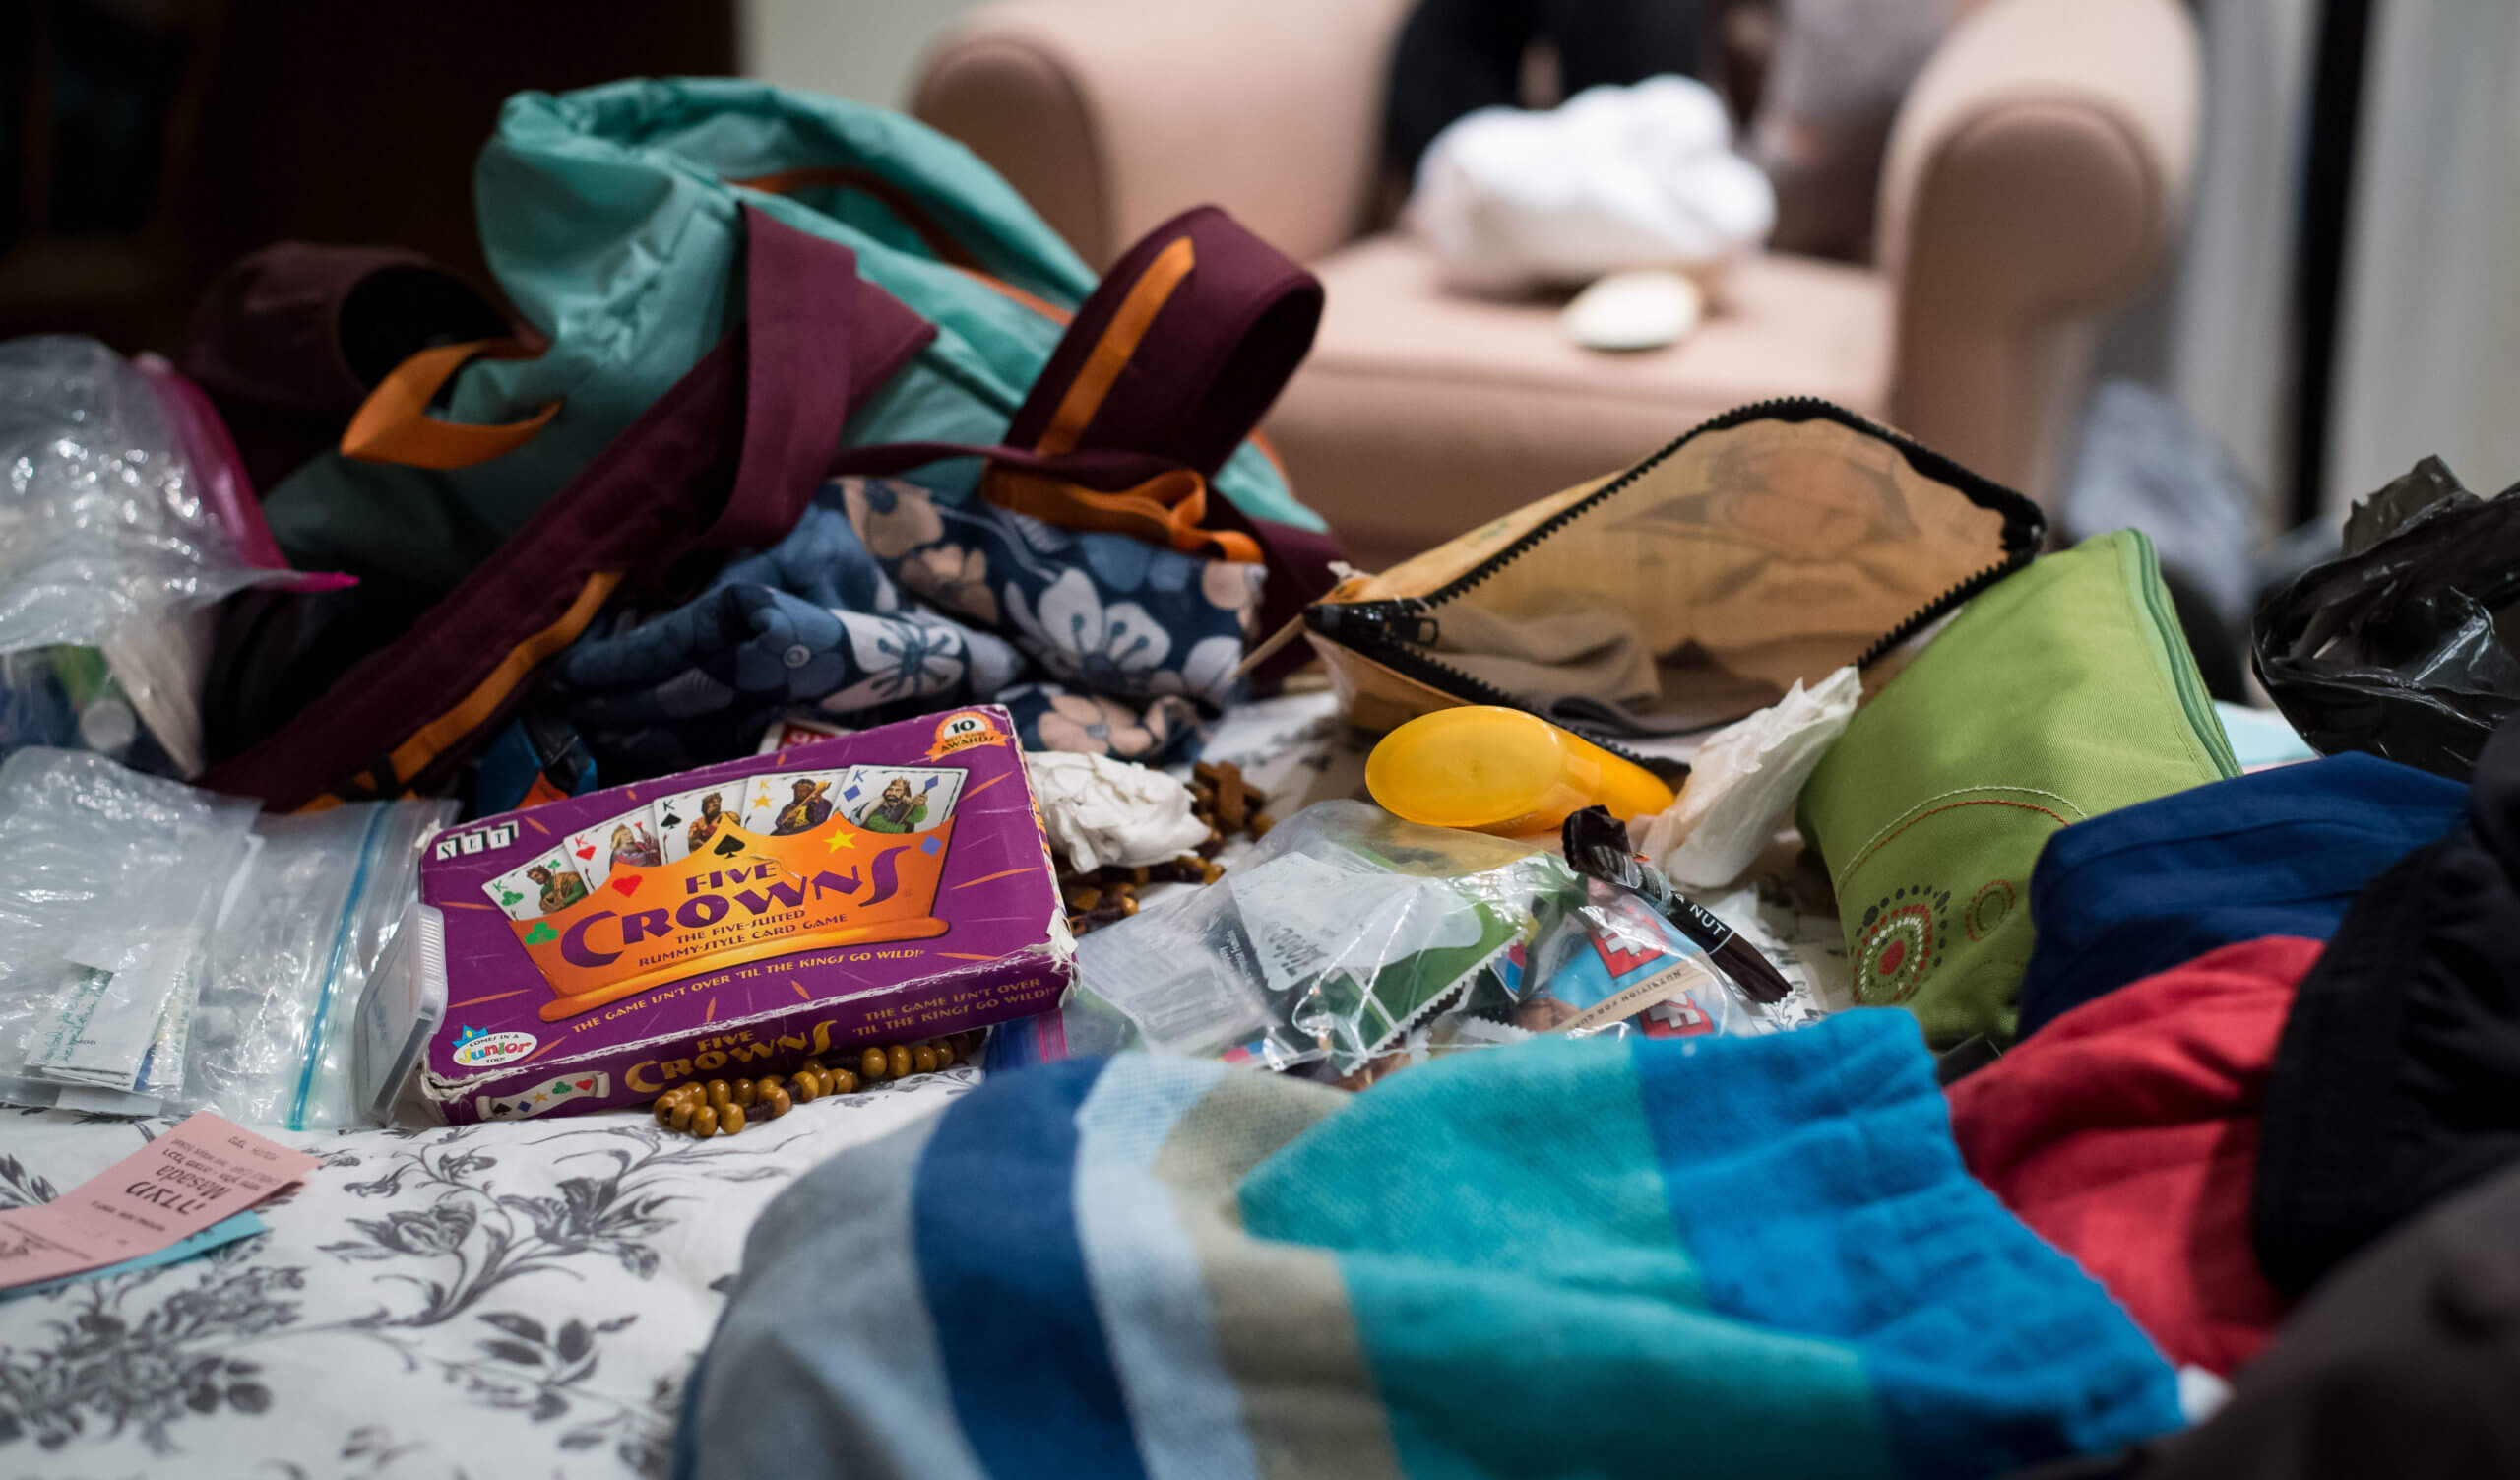 Items cover the surface of a bed and include backpacks, plastic bags, zippered pouches, and a card game labeled 